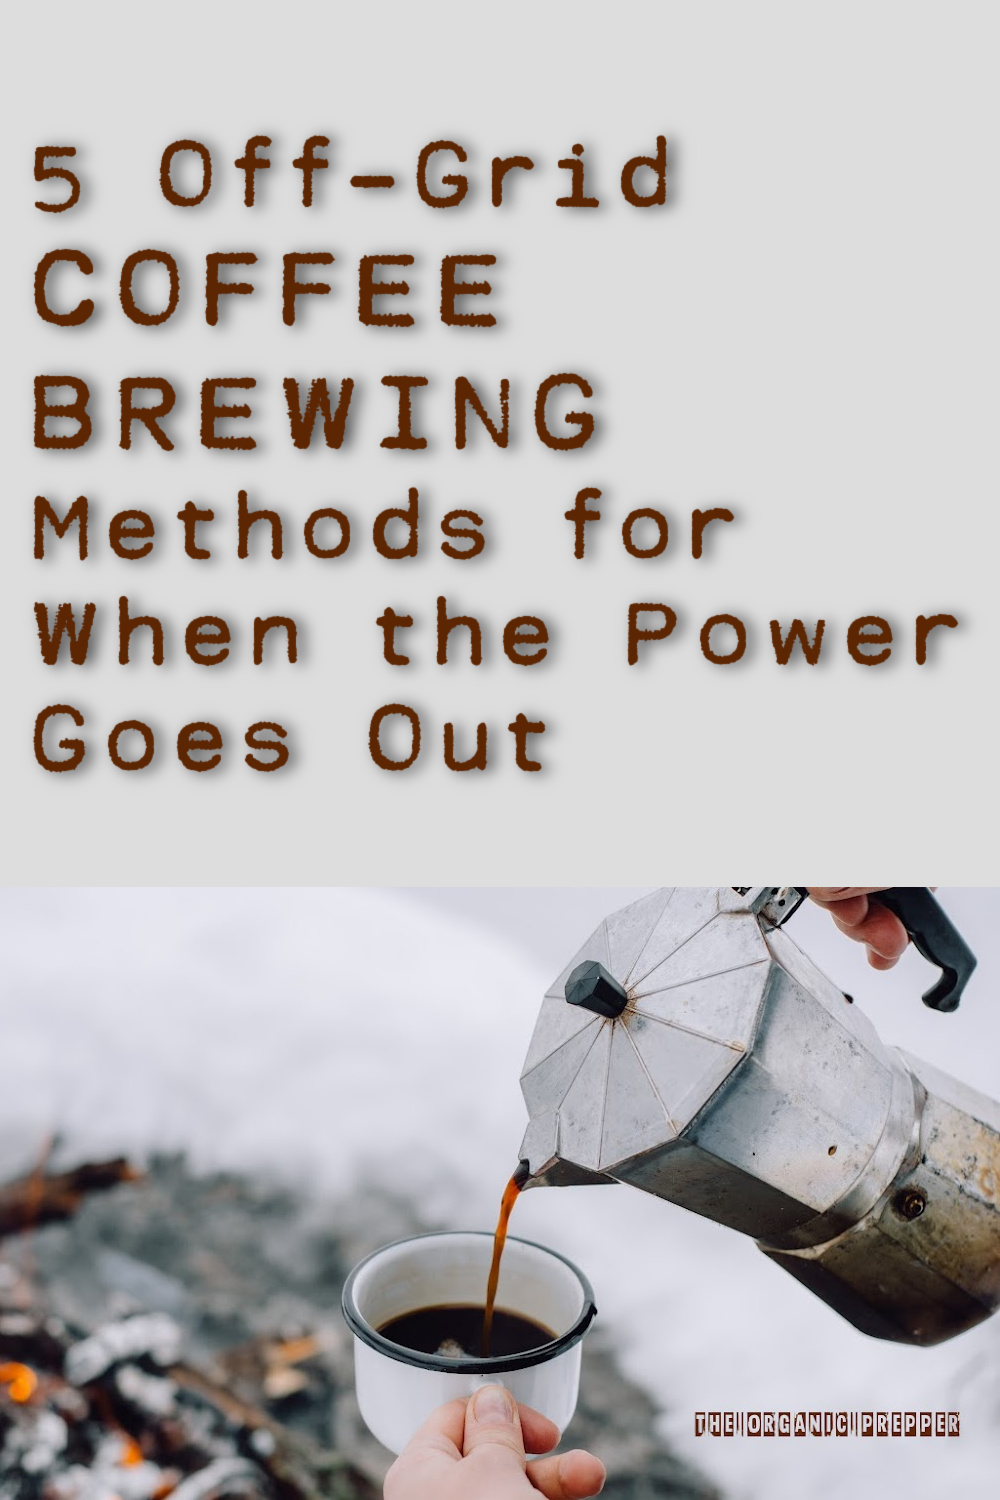 5 Off-Grid Coffee Brewing Methods for When the Power Goes Out